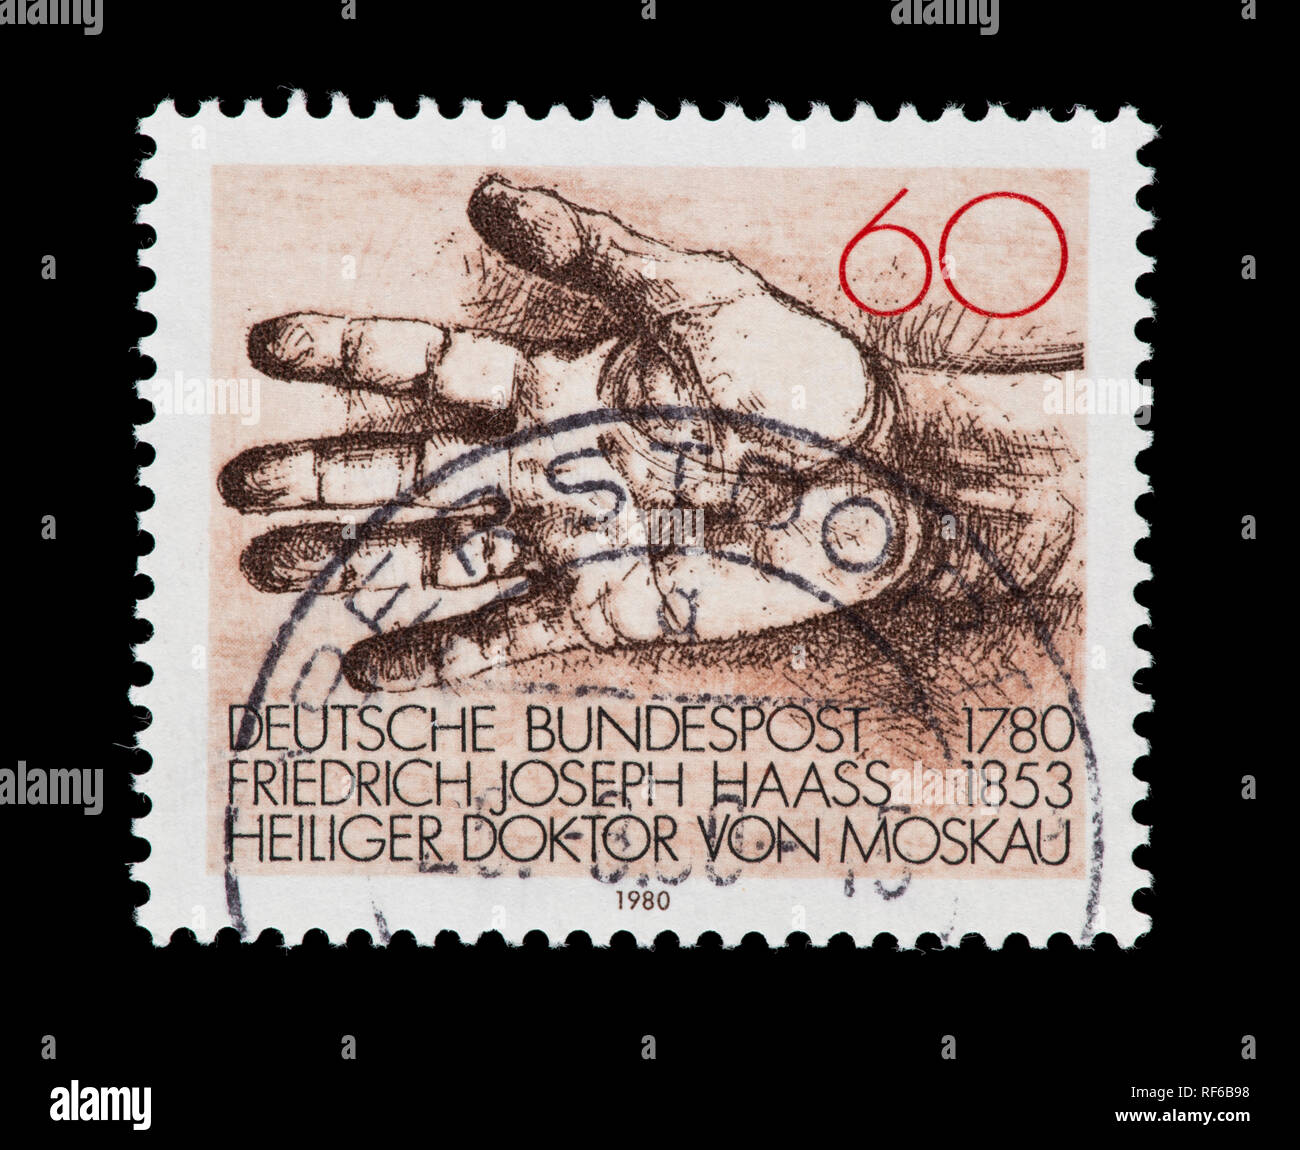 Postage stamp from Germany depicting a helping hand, bicentennial of the birth of Dr. Friedrich Joseph Haass, physician and philanthropist Stock Photo